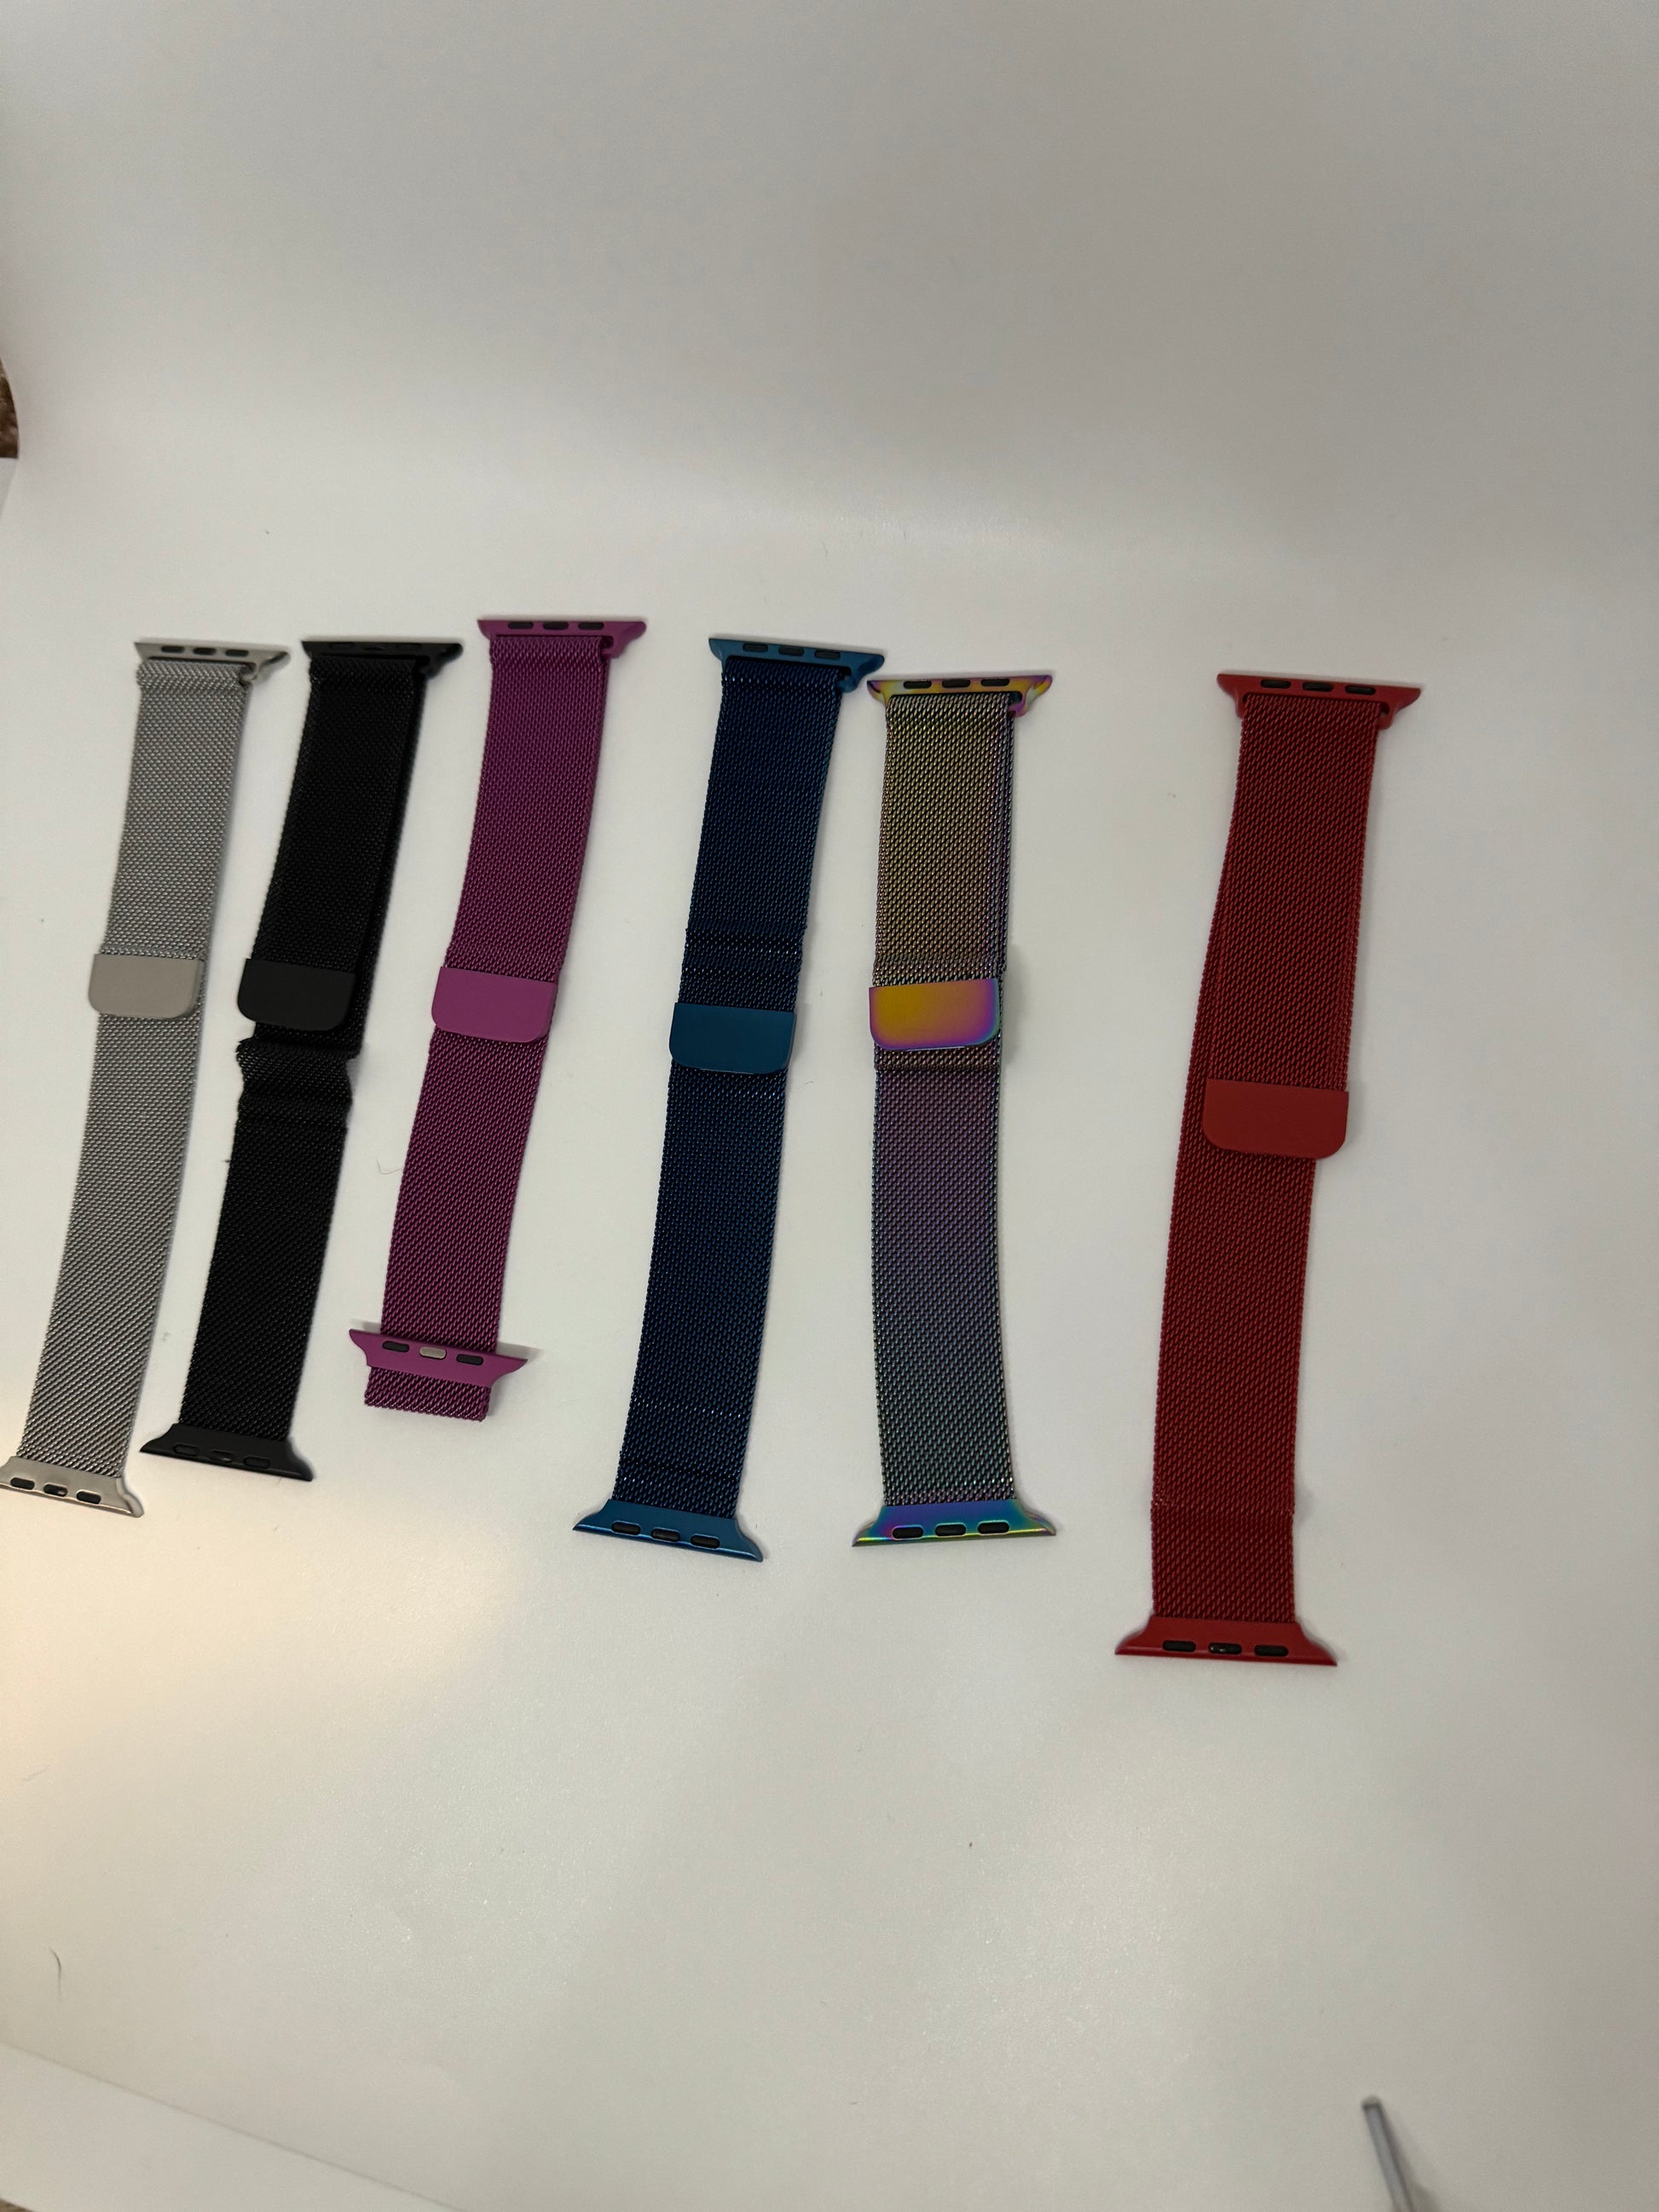 The picture shows six watch bands laid out horizontally on a white surface. From left to right:1. The first band is a silver mesh.2. The second band is solid black.3. The third band is a vibrant magenta color.4. The fourth band is a deep blue.5. The fifth band has a gradient pattern, starting with a golden brown at the top, transitioning to a pinkish-purple in the middle, and ending with a teal color at the bottom.6. The last band on the right is a solid dark red color.Each band has metal